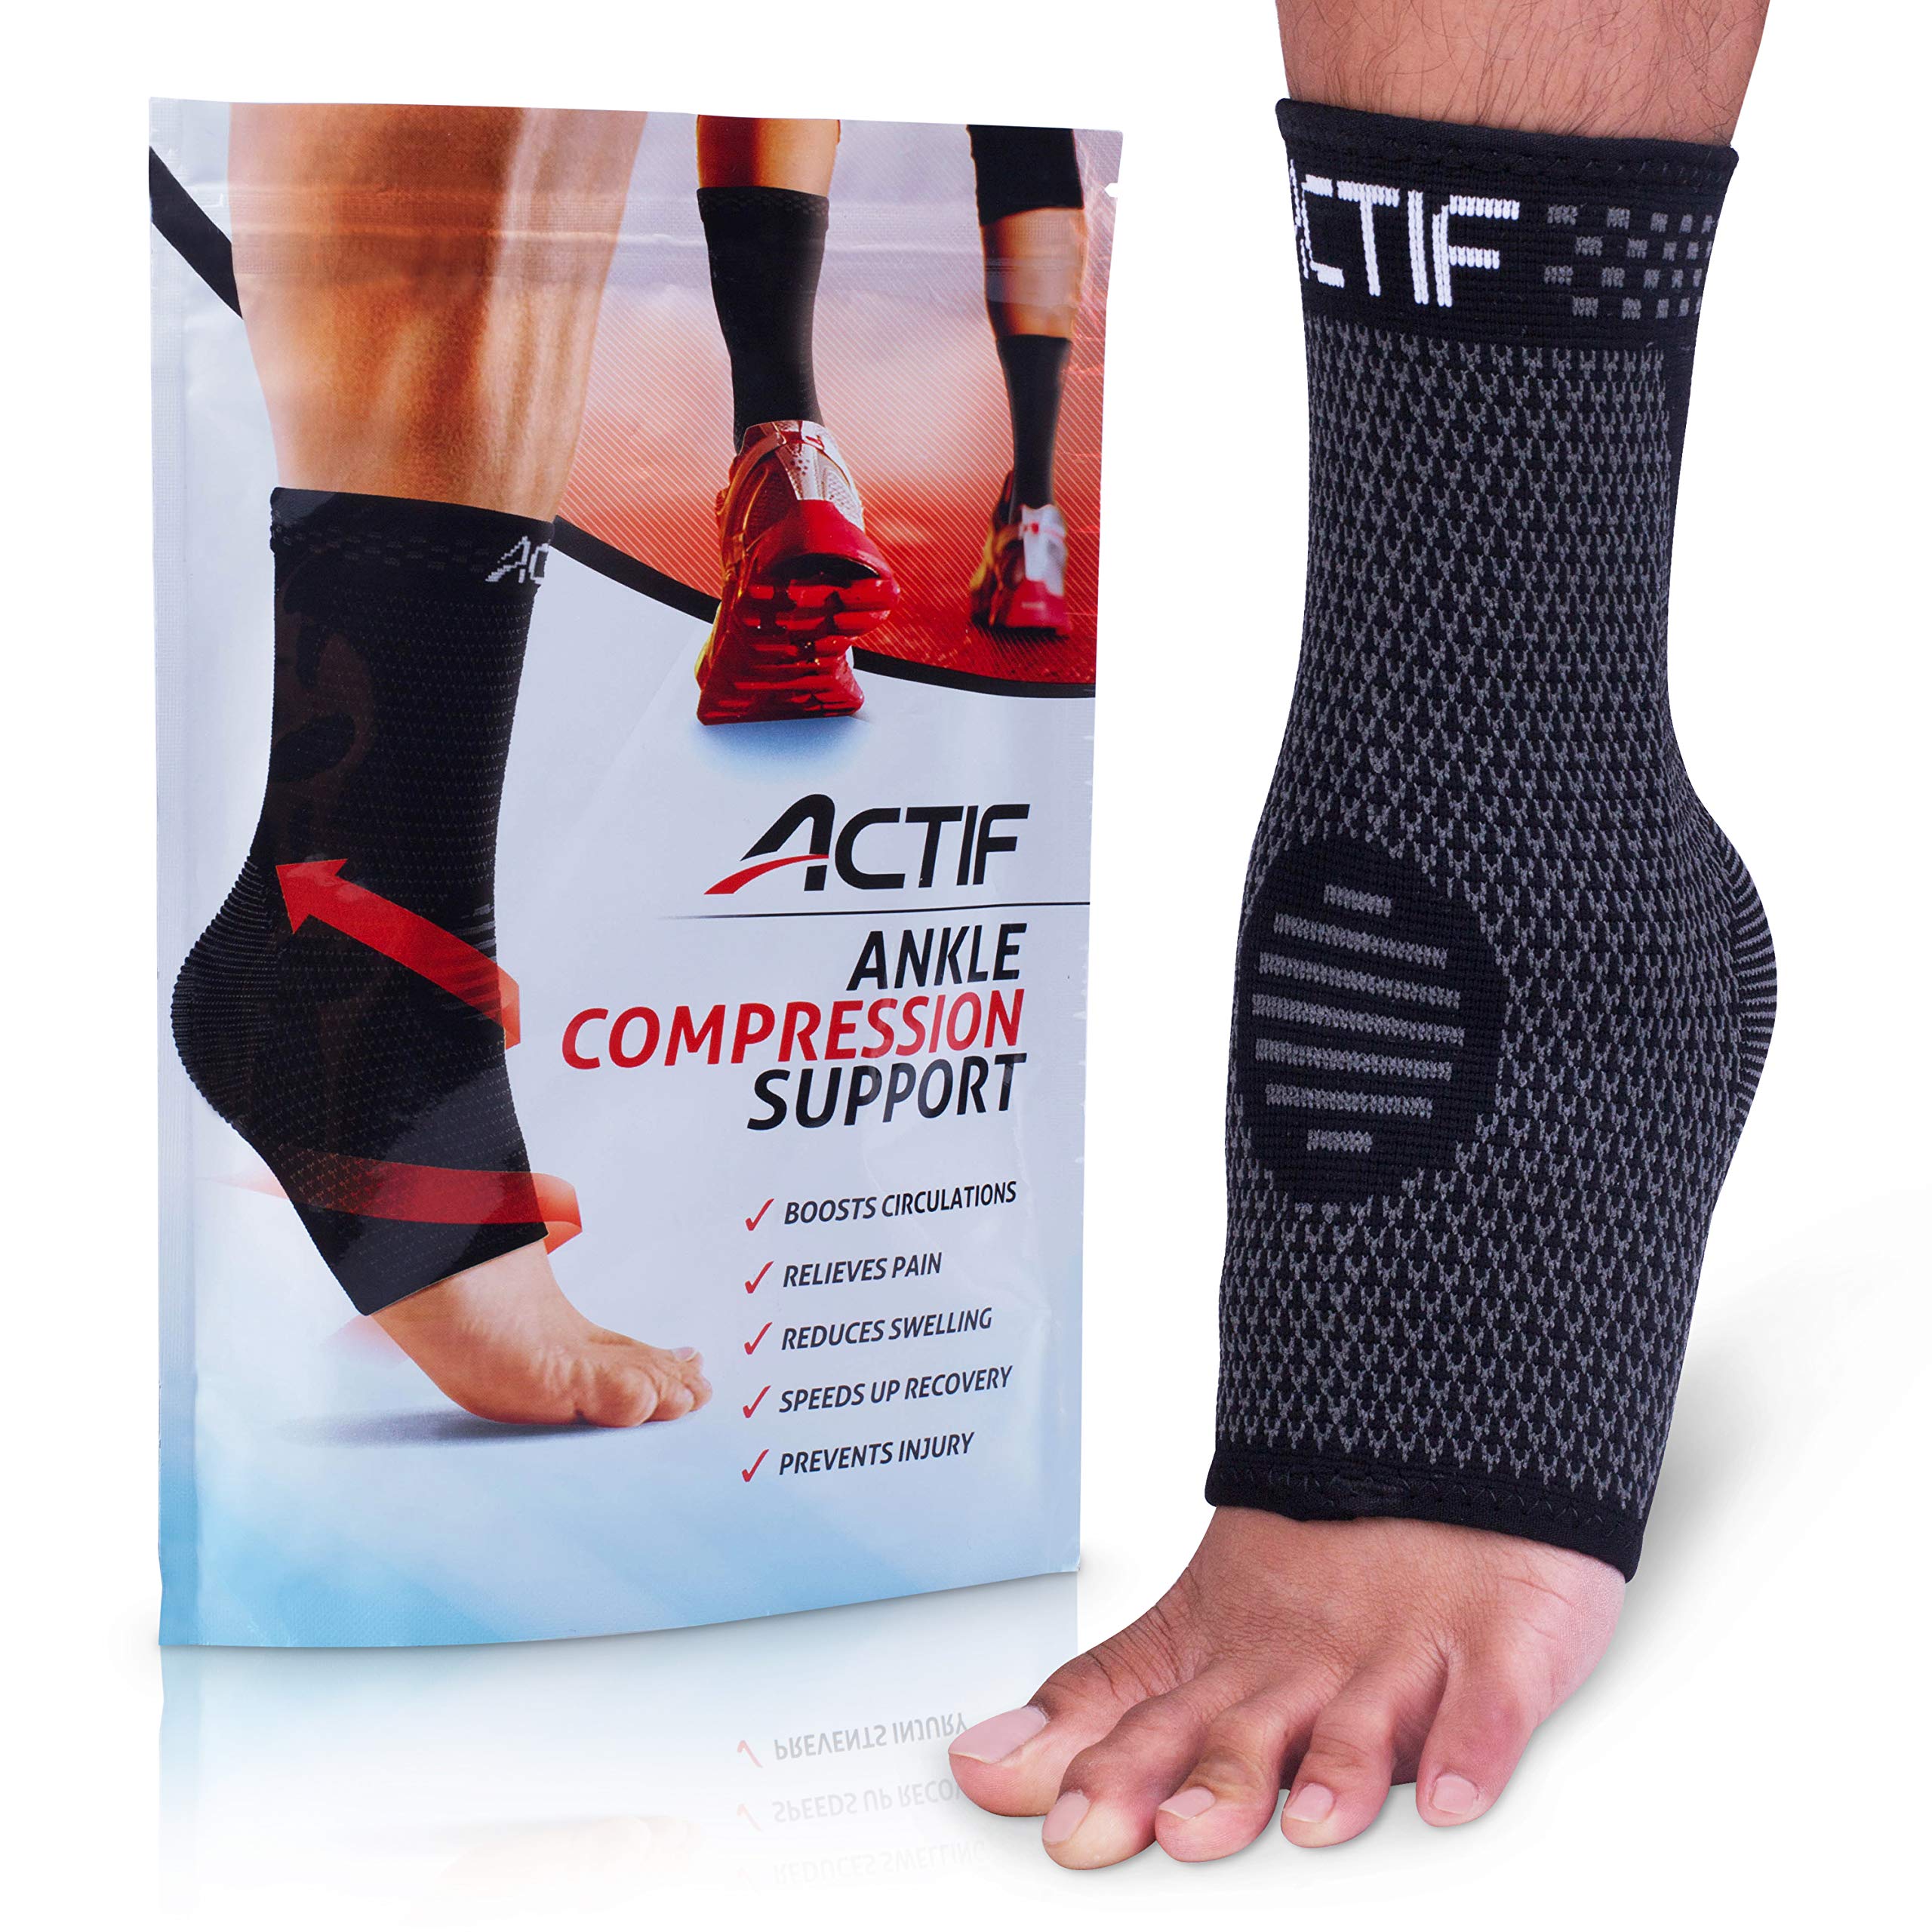 Actif Sports Ankle Compression Sleeve - Breathable Ankle Sleeve to Speed Up Recovery, Prevent Injury, Reduce Swelling, Achilles Tendon and Plantar Fasciitis Support, and More (Small US Size 4-7)